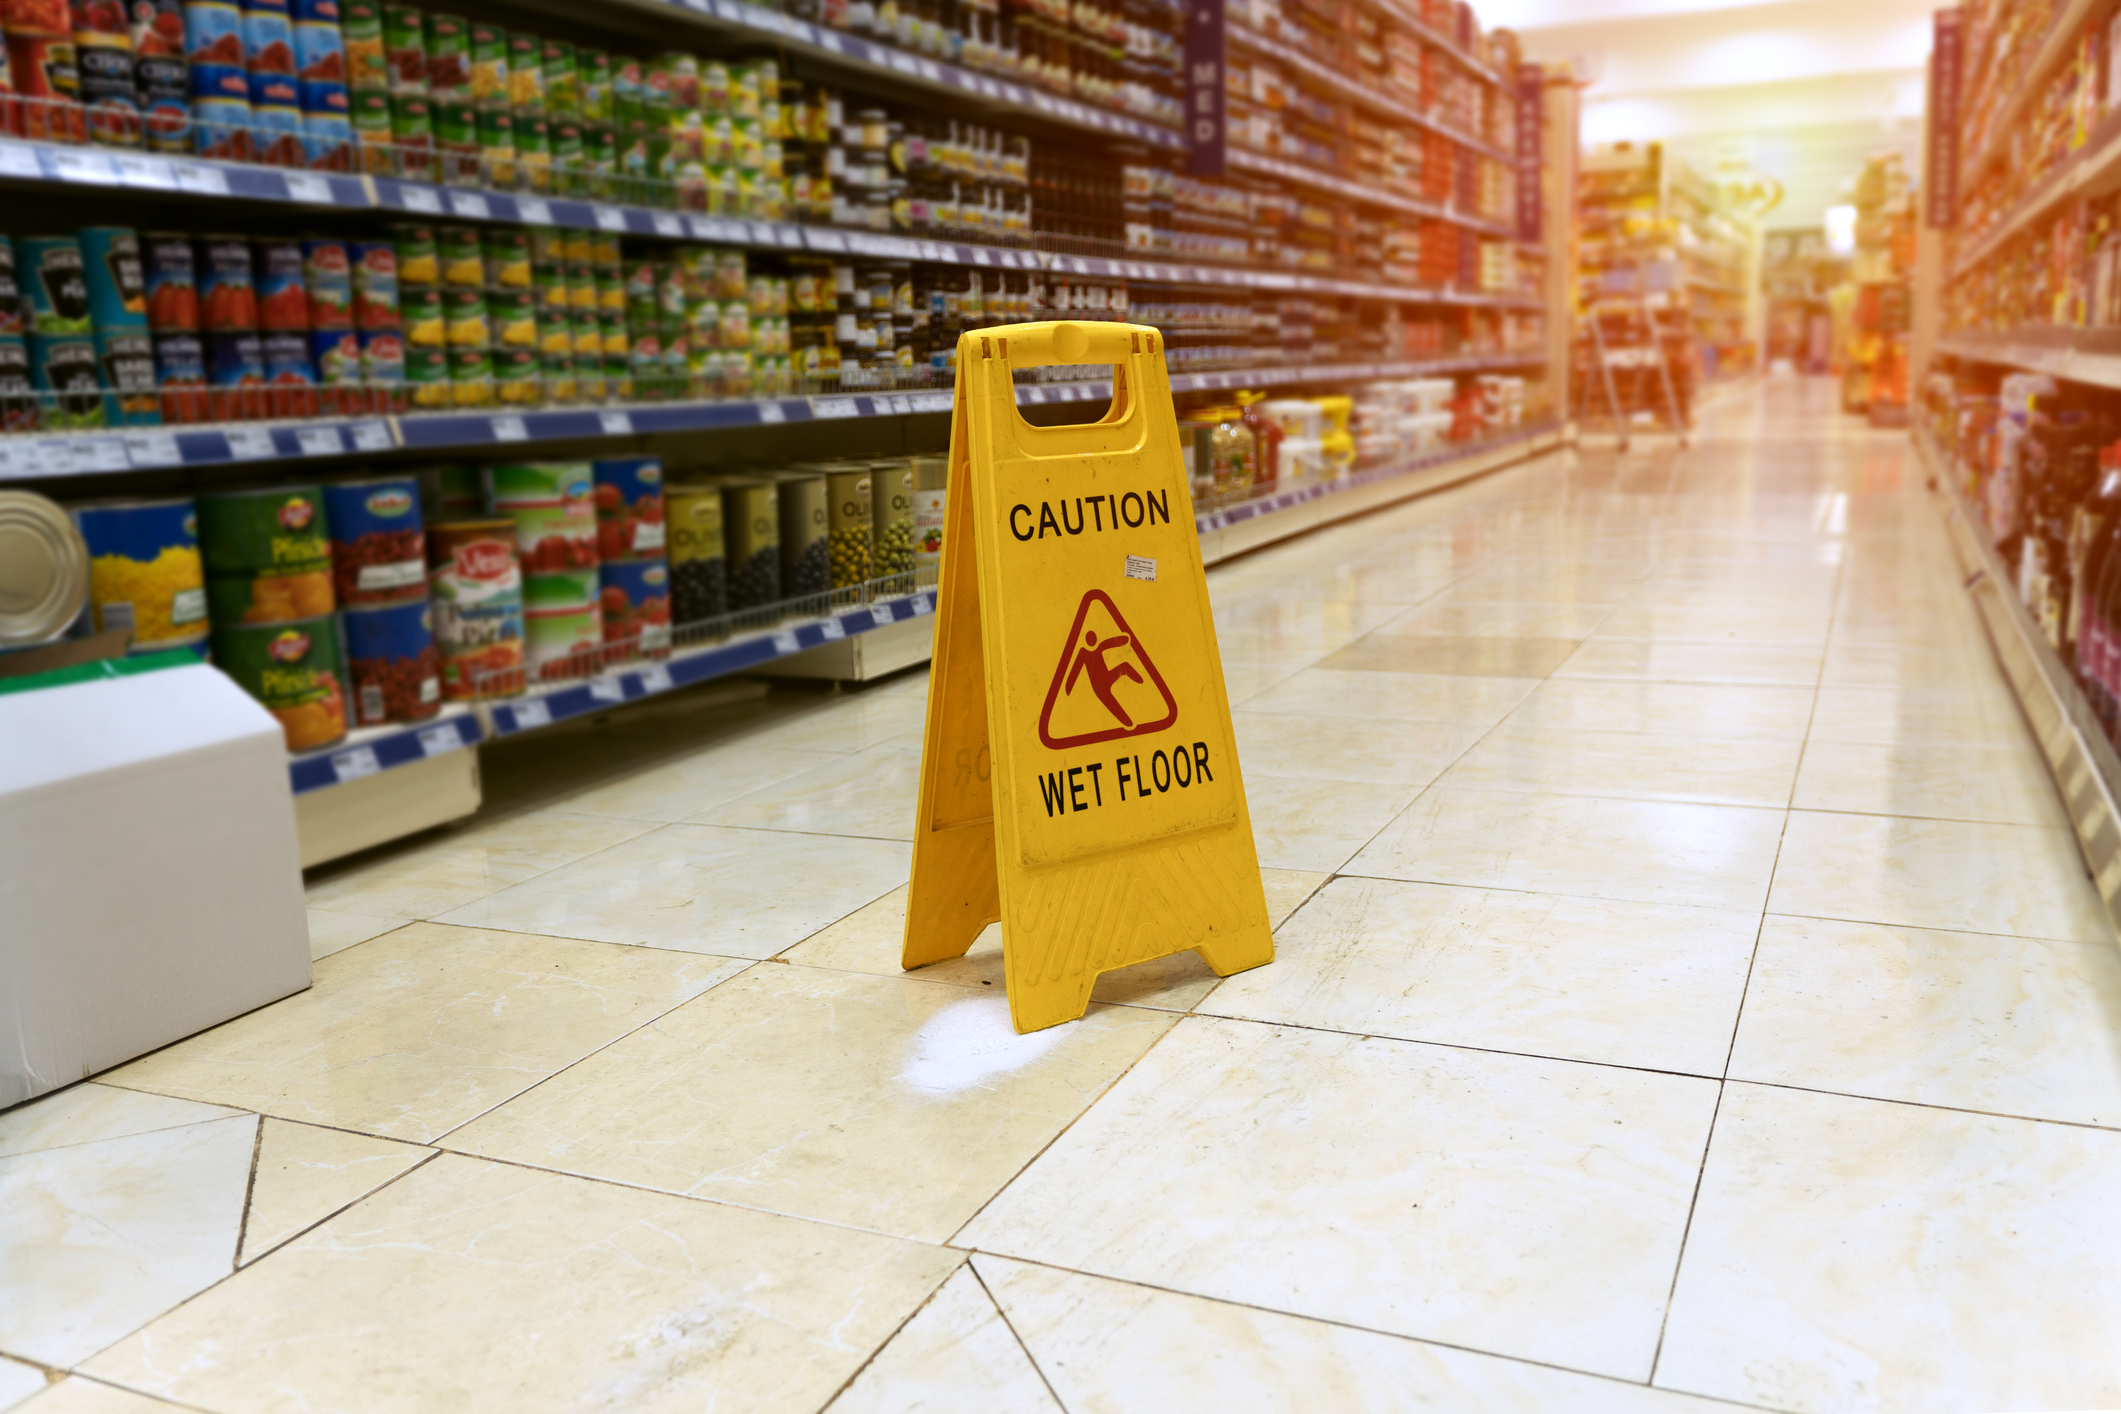 No Recovery for Slip and Fall on Shampoo Due to Store’s Lack of Notice Defense